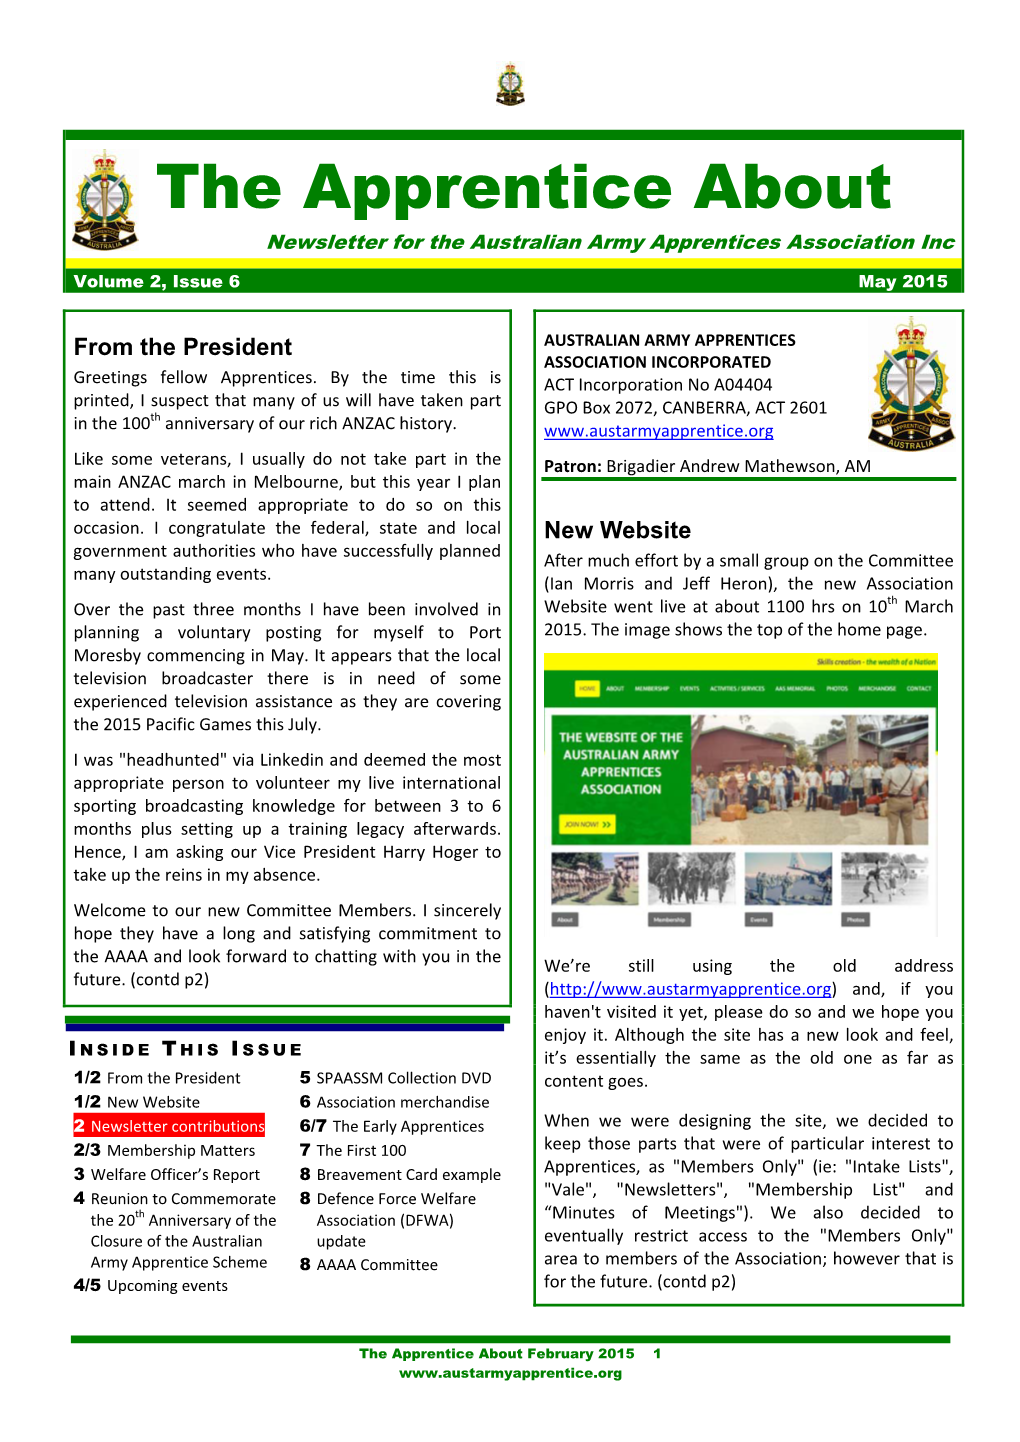 The Apprentice About Newsletter for the Australian Army Apprentices Association Inc